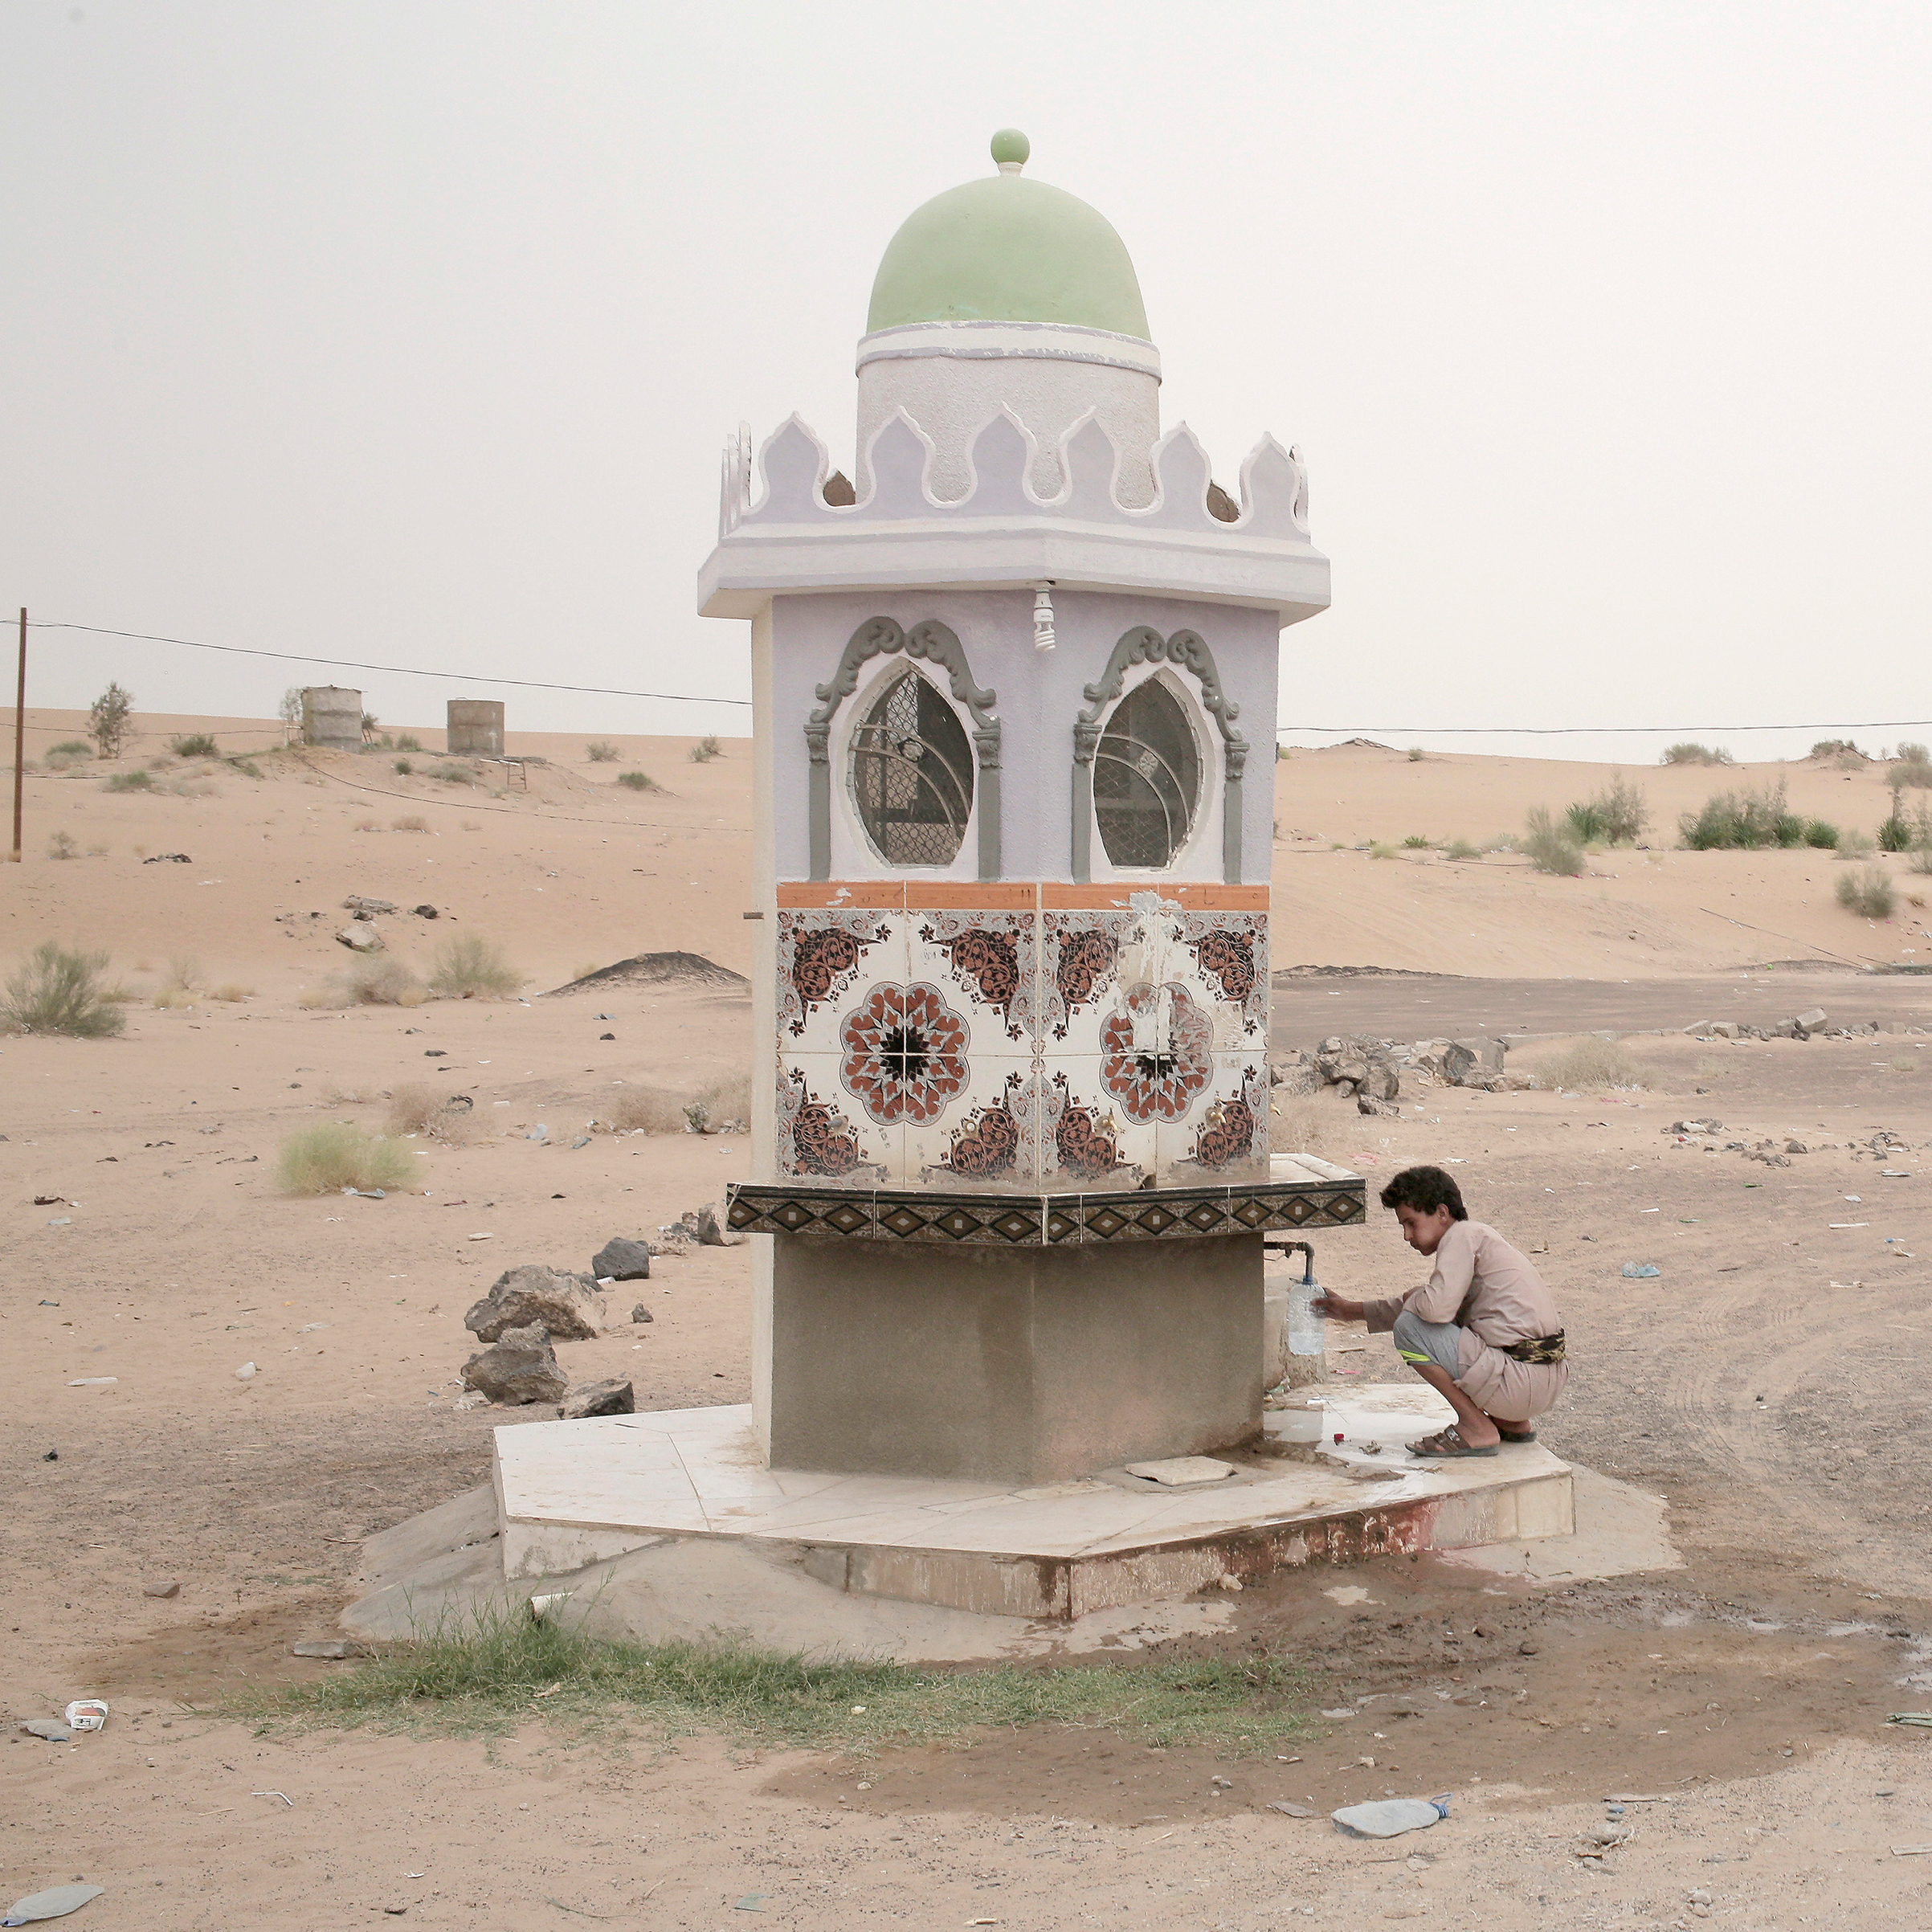 A boy collects water from a roadside fountain in Marib on July 29. (Nariman El-Mofty—AP)